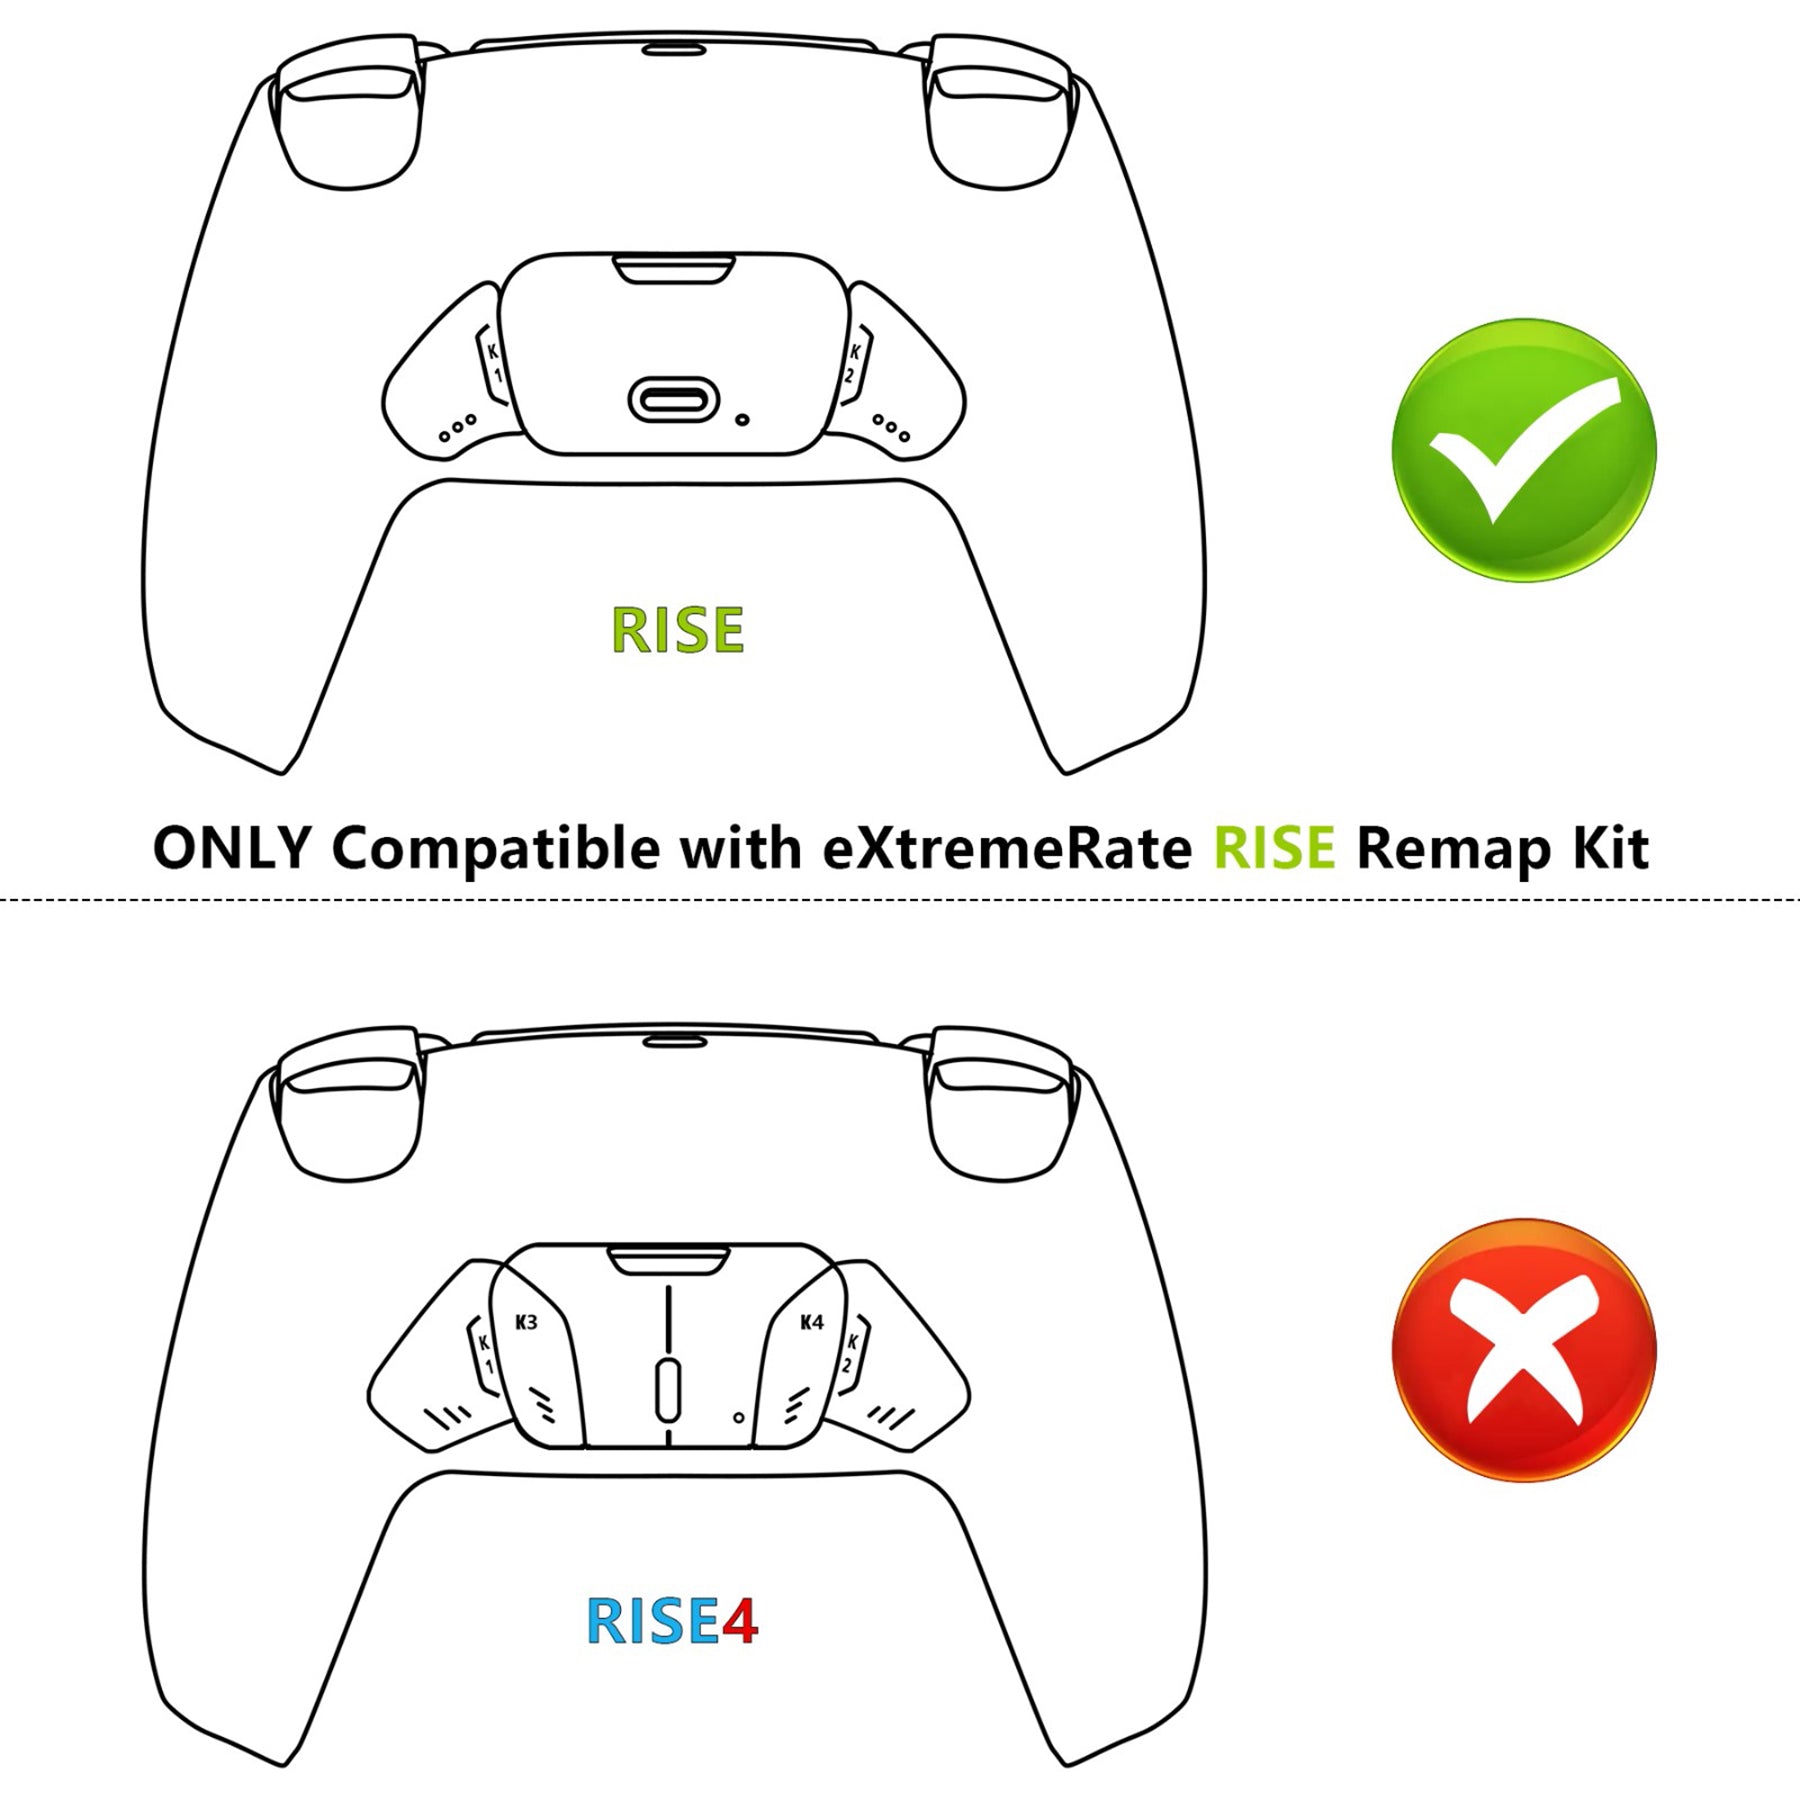 eXtremeRate Replacement Redesigned K1 K2 Back Buttons for eXtremerate RISE Remap Kit, Compatible with PS5 Controller - Solid Black eXtremeRate